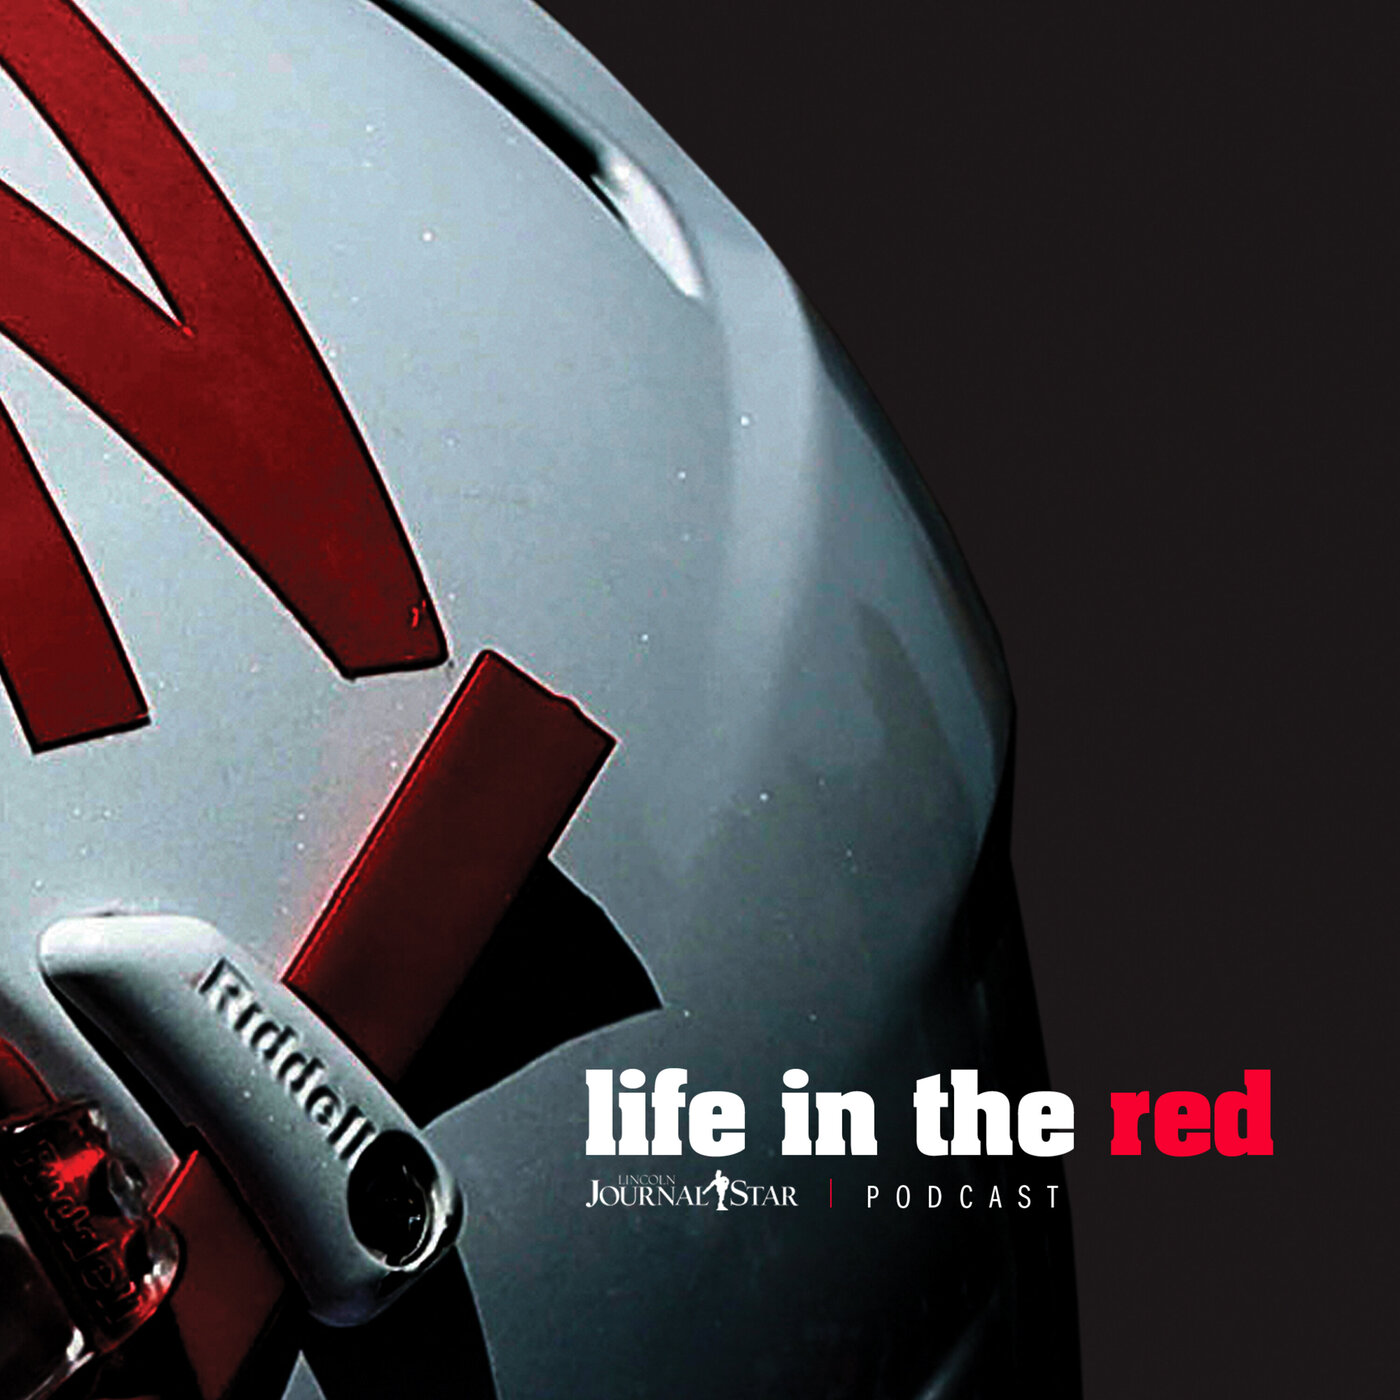 Life in the Red Podcast: A conversation with new Journal Star, HuskerExtra columnist Amie Just